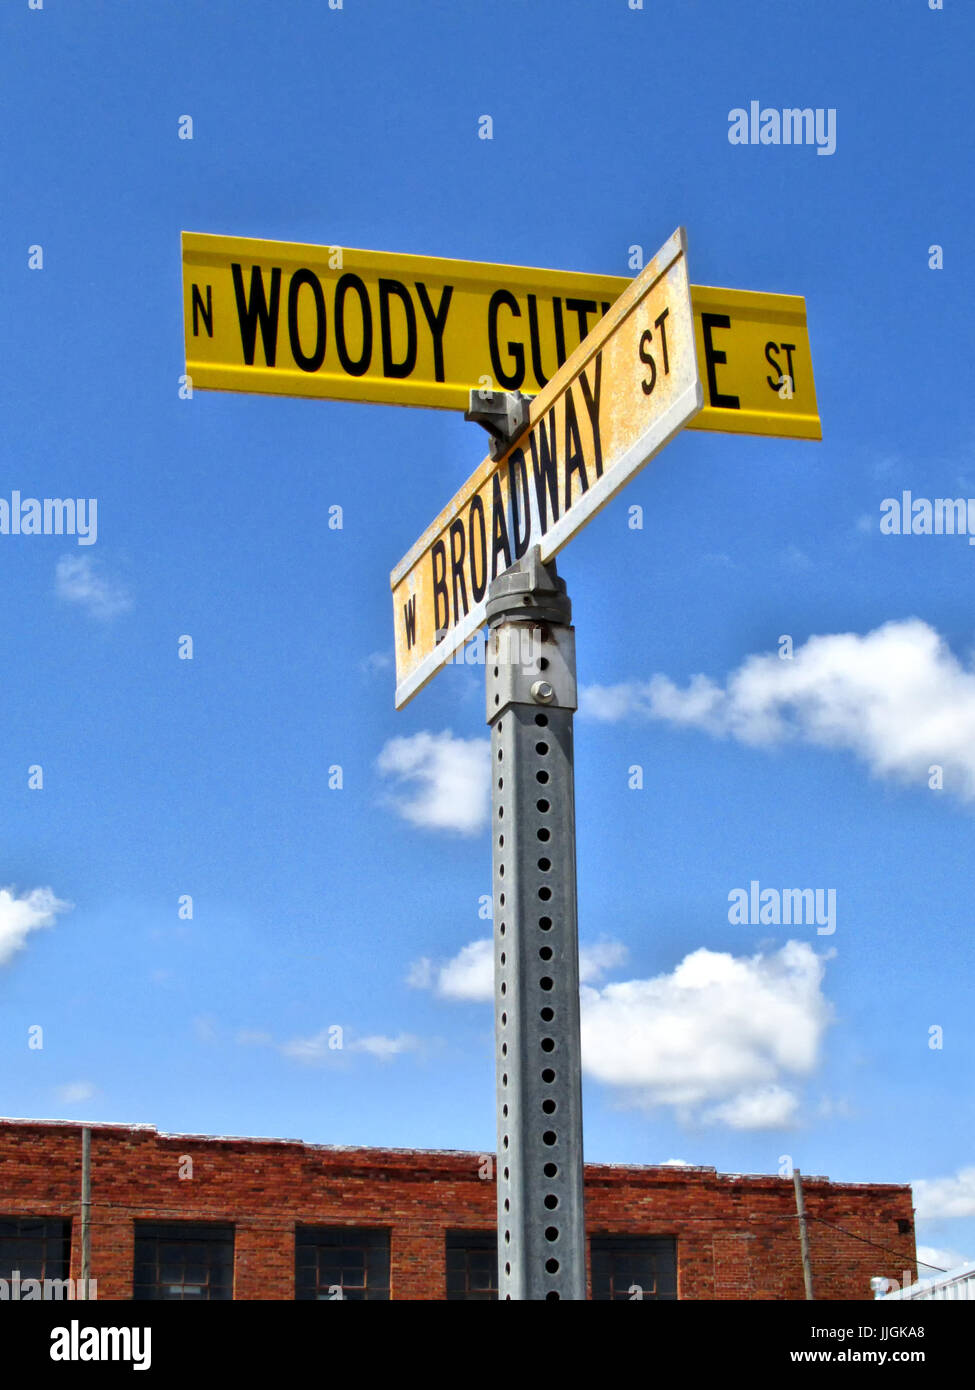 The street signs of Woody Guthrie Street and Broadway stand in downtown Okemah Oklahoma. Stock Photo